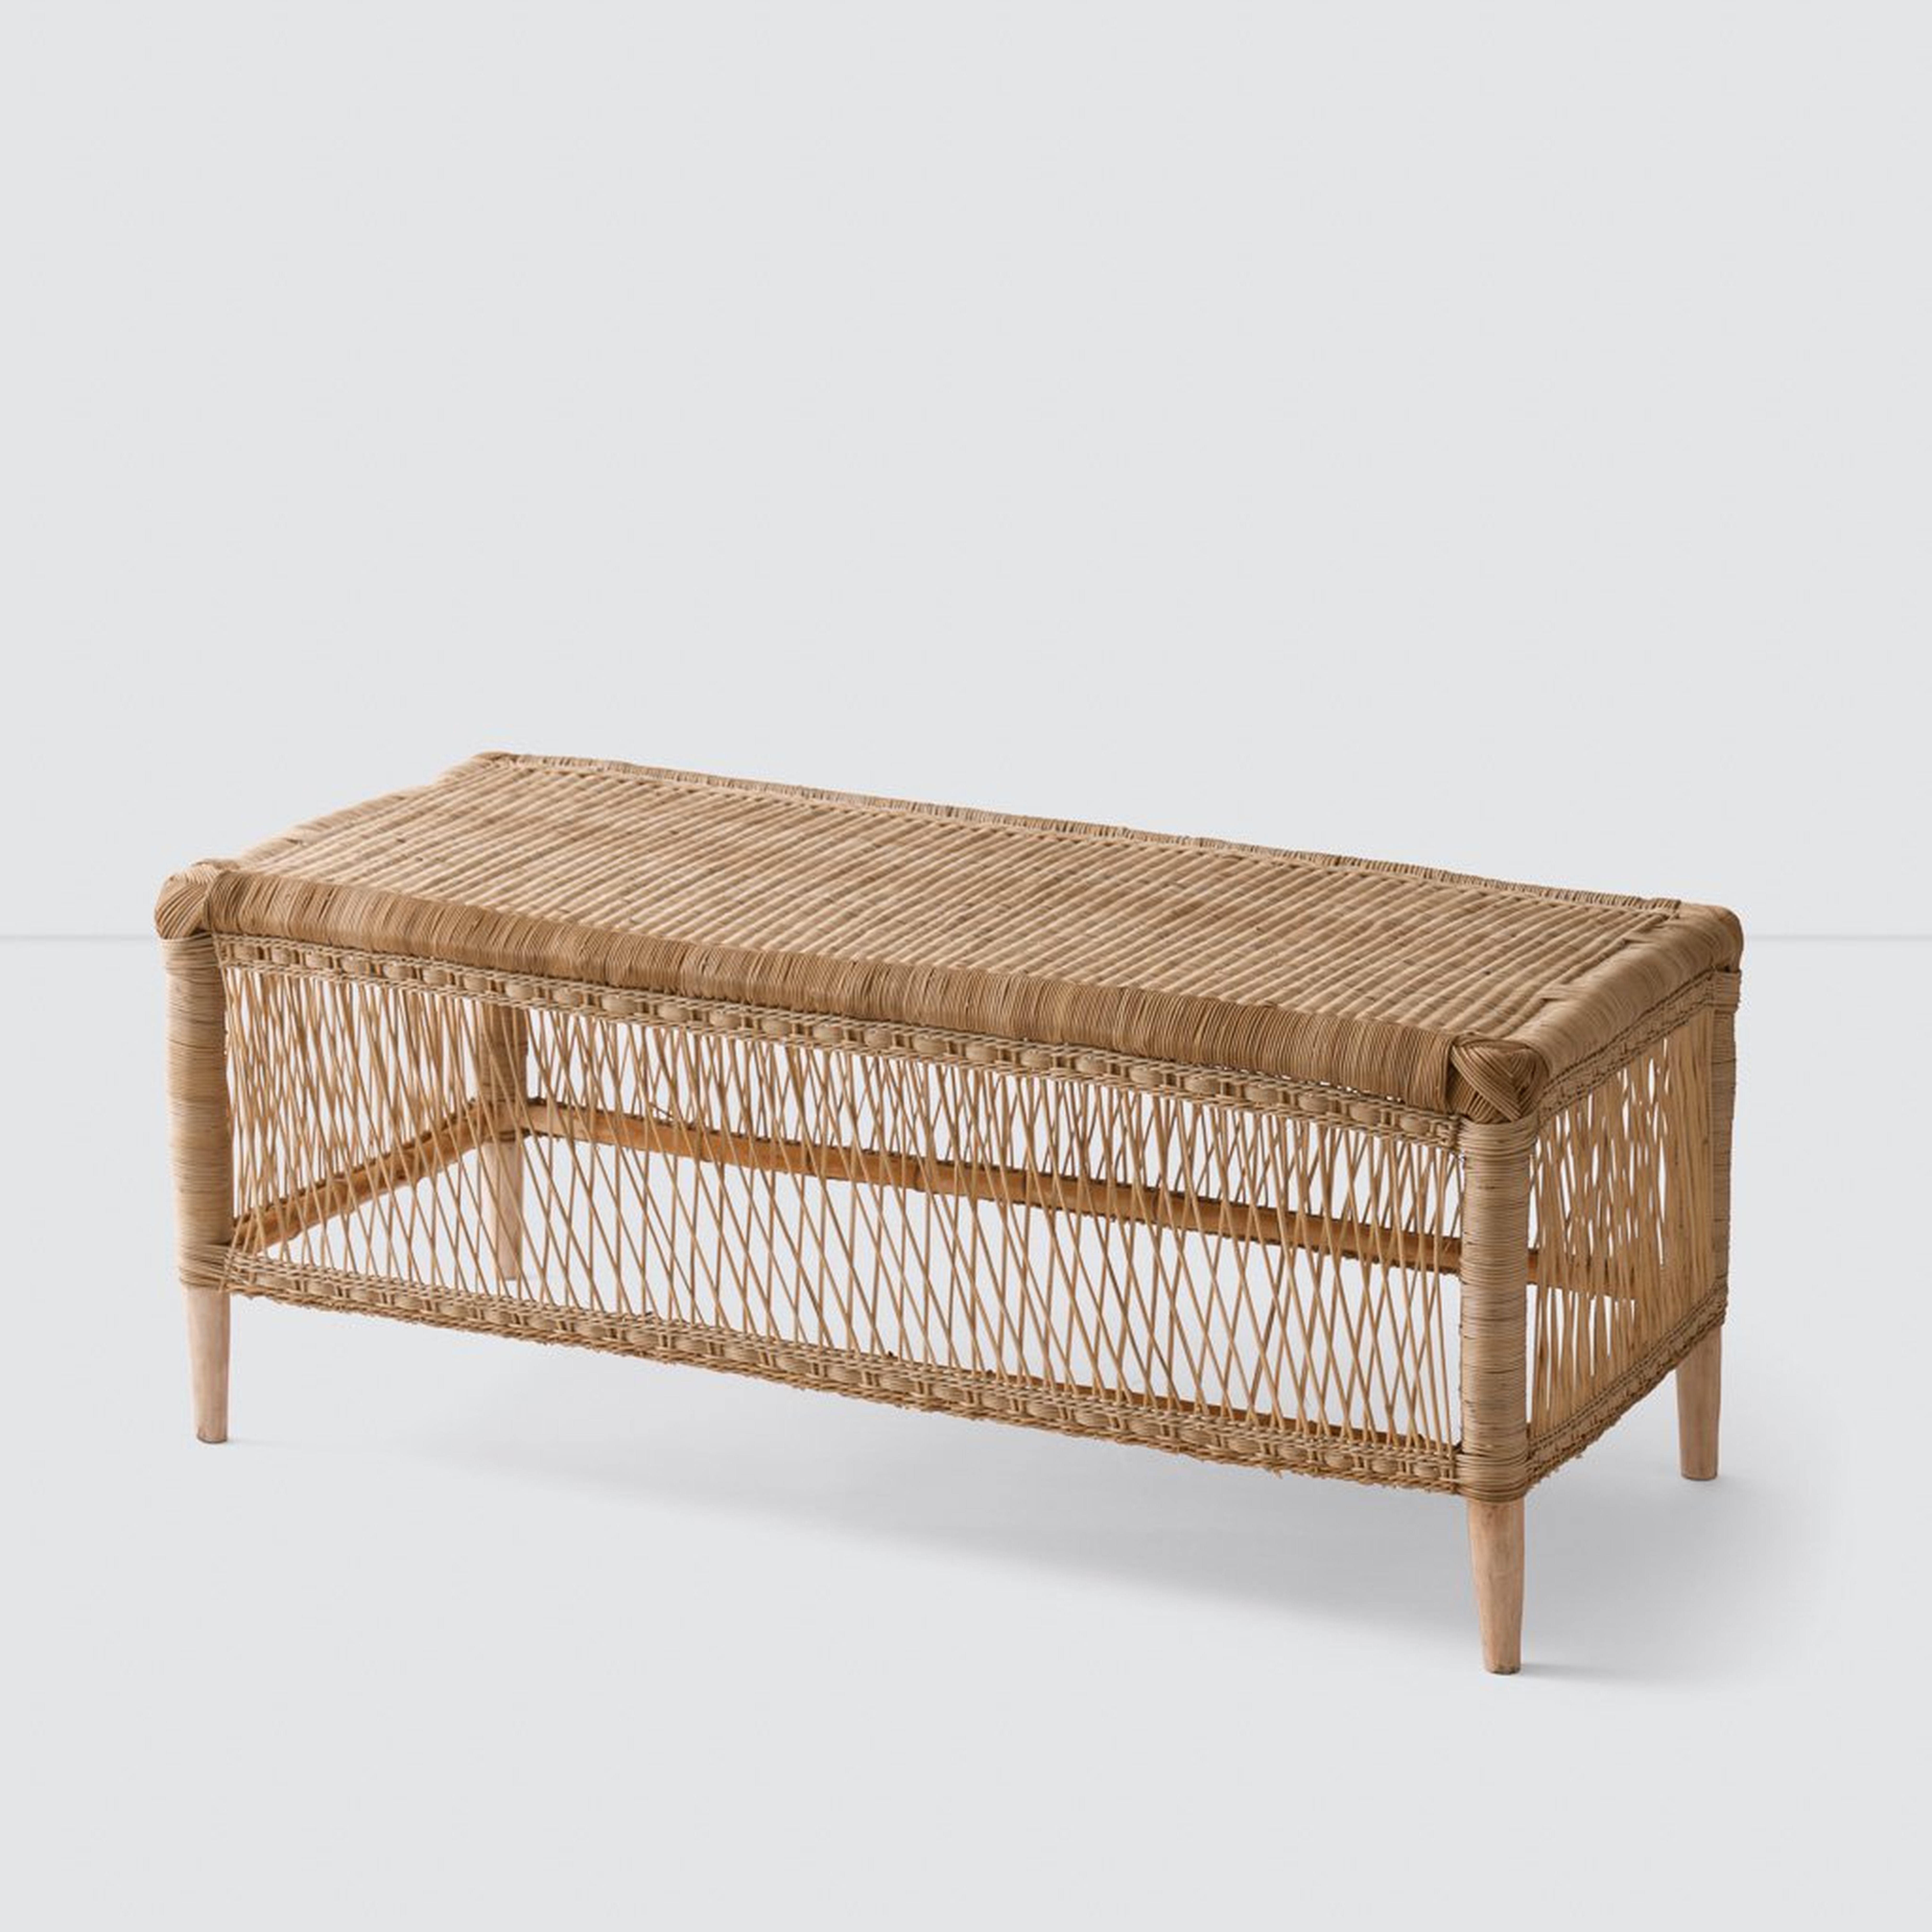 Azibo Woven Bench By The Citizenry - The Citizenry